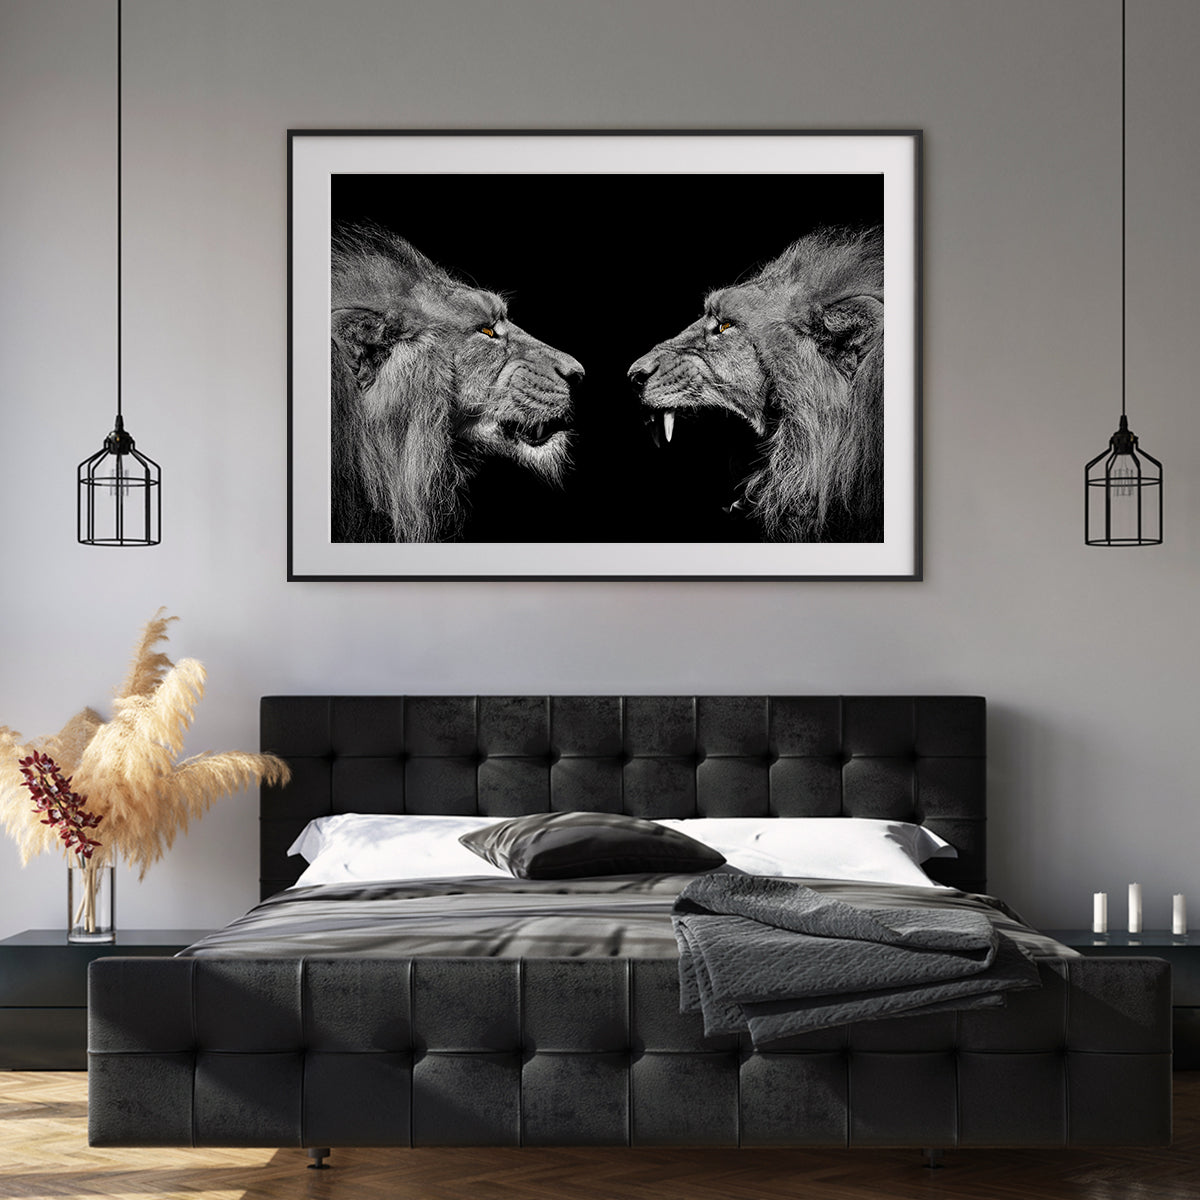 Two Lions Black White Portrait Motivational Posters For Office-Horizontal Posters NOT FRAMED-CetArt-10″x8″ inches-CetArt